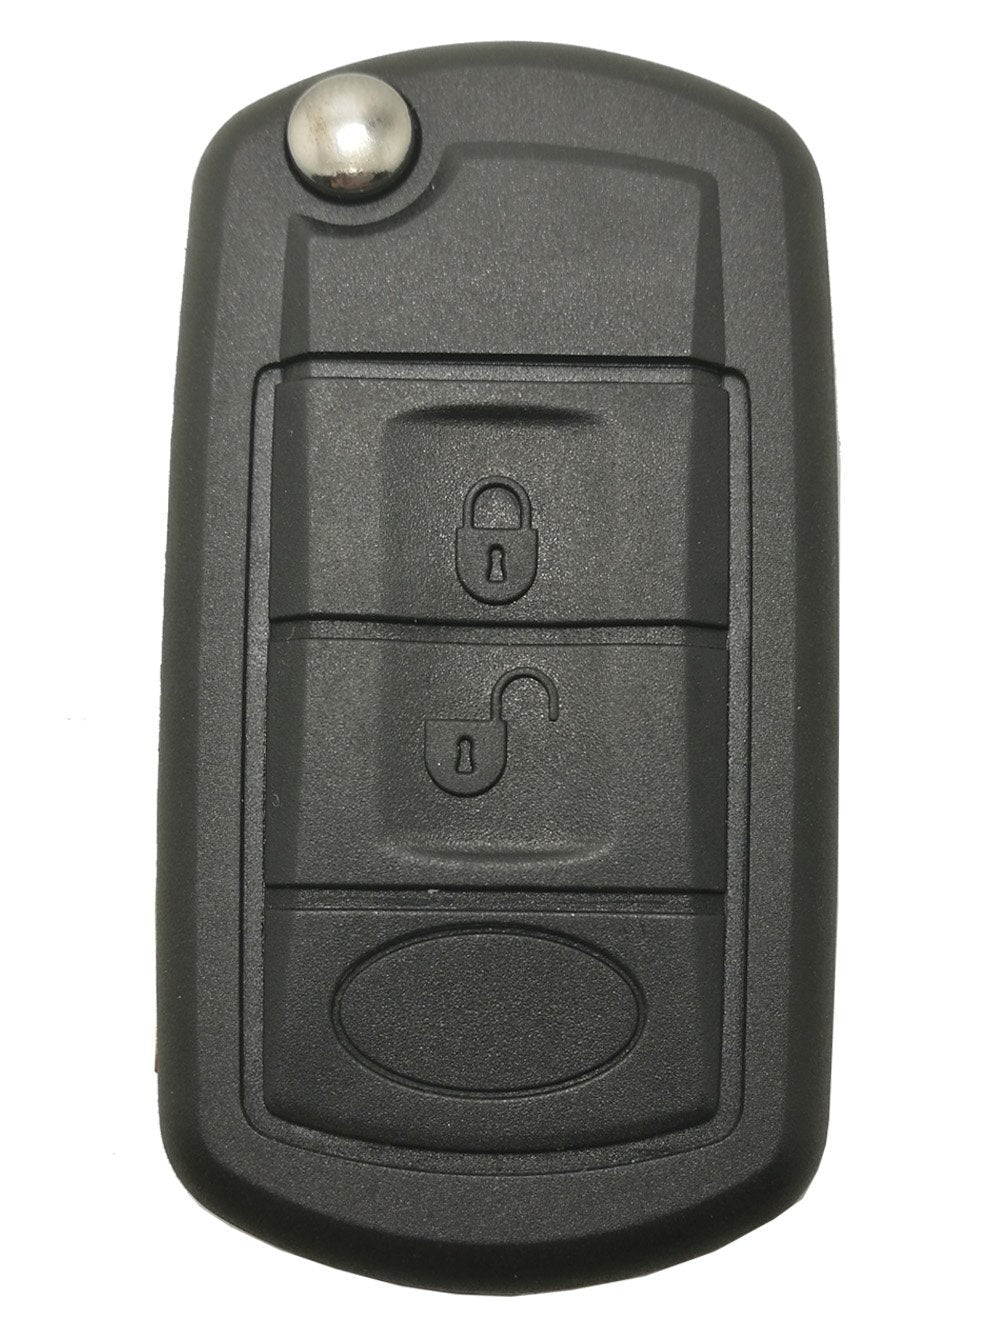  [AUSTRALIA] - J-ACCES Key Fob Case Shell Fit for Land Rover LR3 Discovery Range Rover Sport Flip Keyless Entry Remote Car Key Fob Cover Replacement Key Casing Black